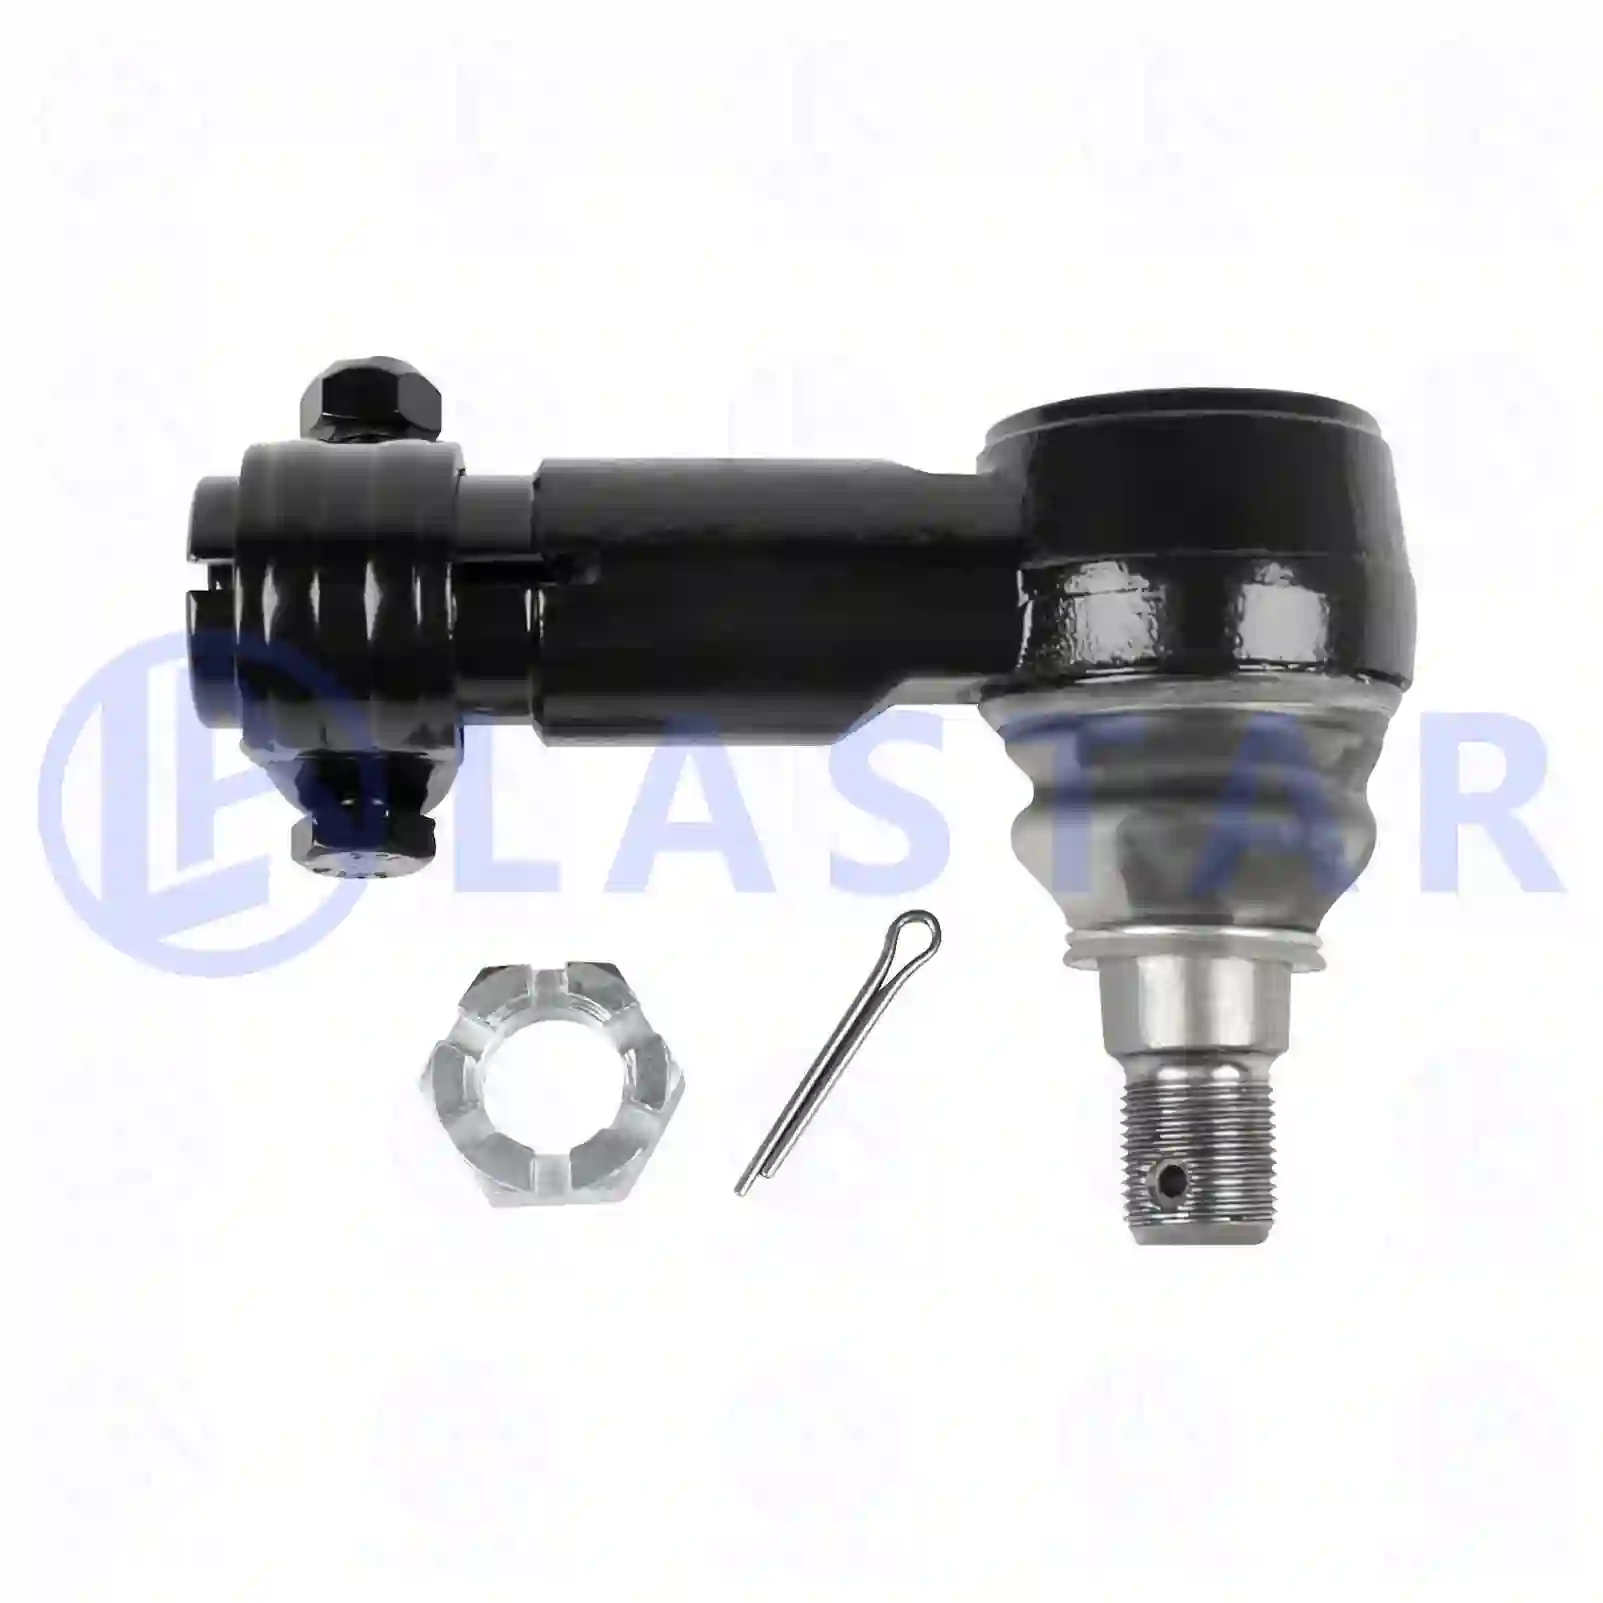 Ball joint, right hand thread, 77705666, 1344684, , , , ||  77705666 Lastar Spare Part | Truck Spare Parts, Auotomotive Spare Parts Ball joint, right hand thread, 77705666, 1344684, , , , ||  77705666 Lastar Spare Part | Truck Spare Parts, Auotomotive Spare Parts